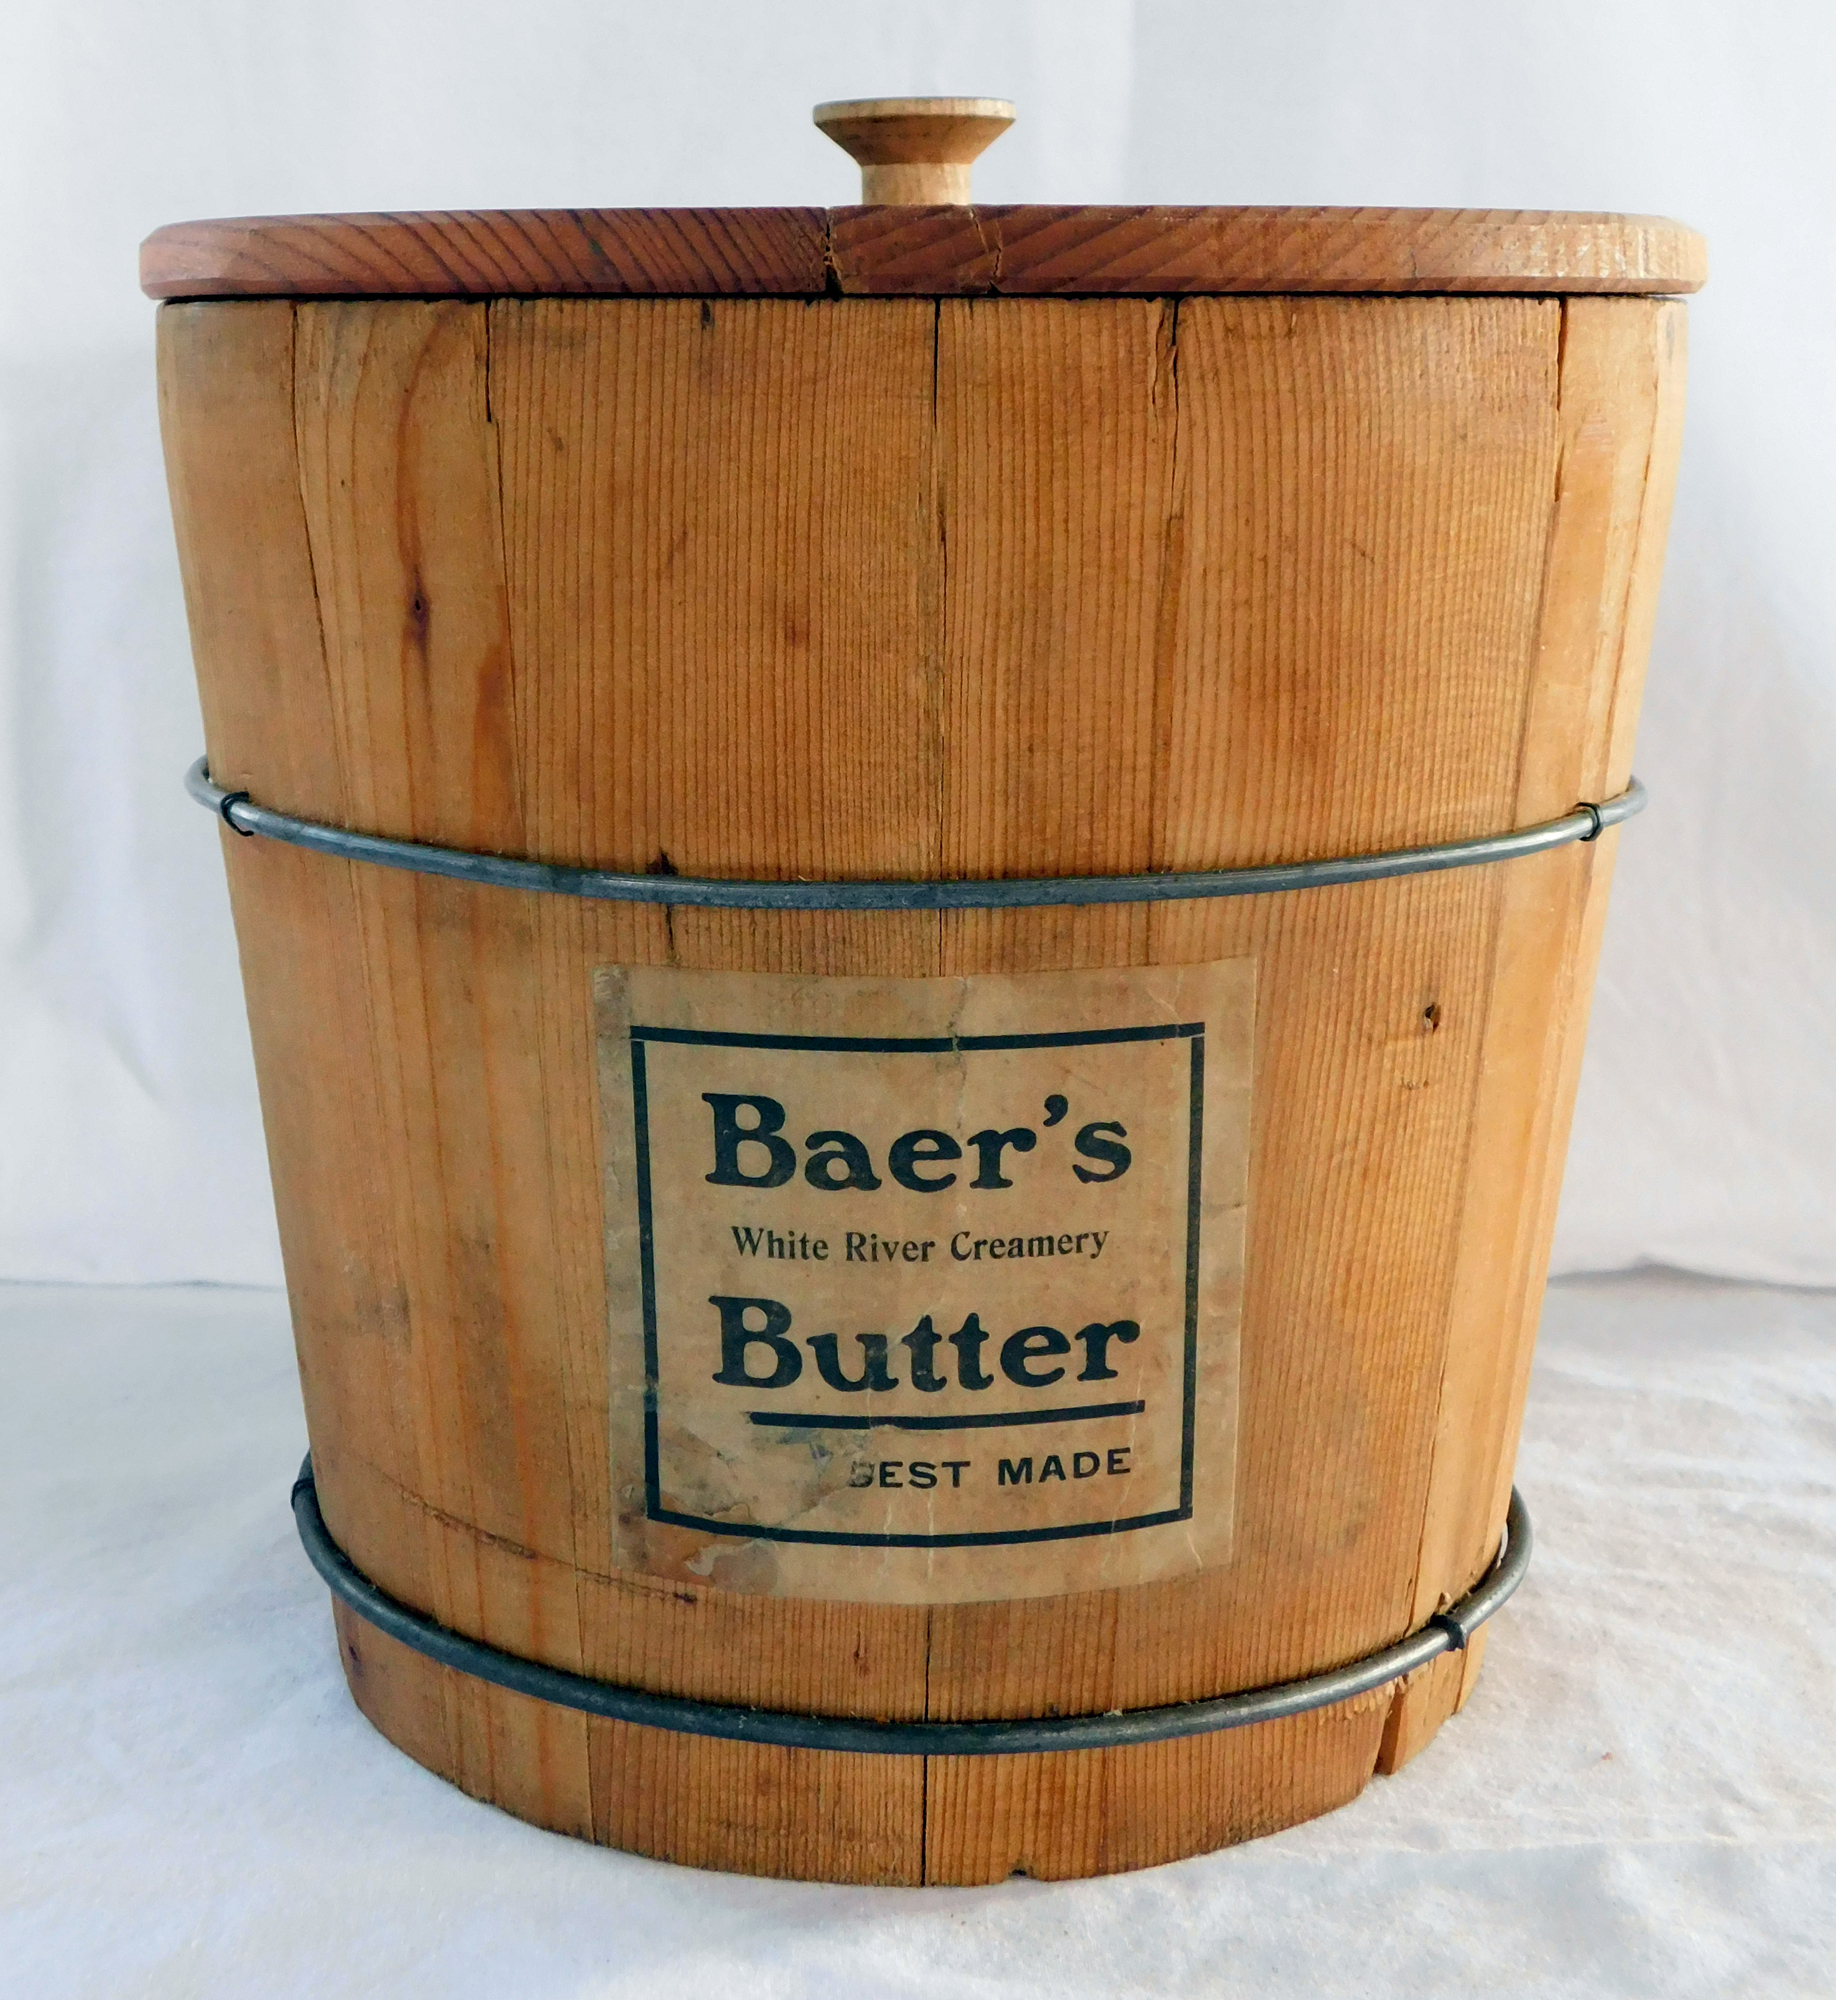 Butter Tub